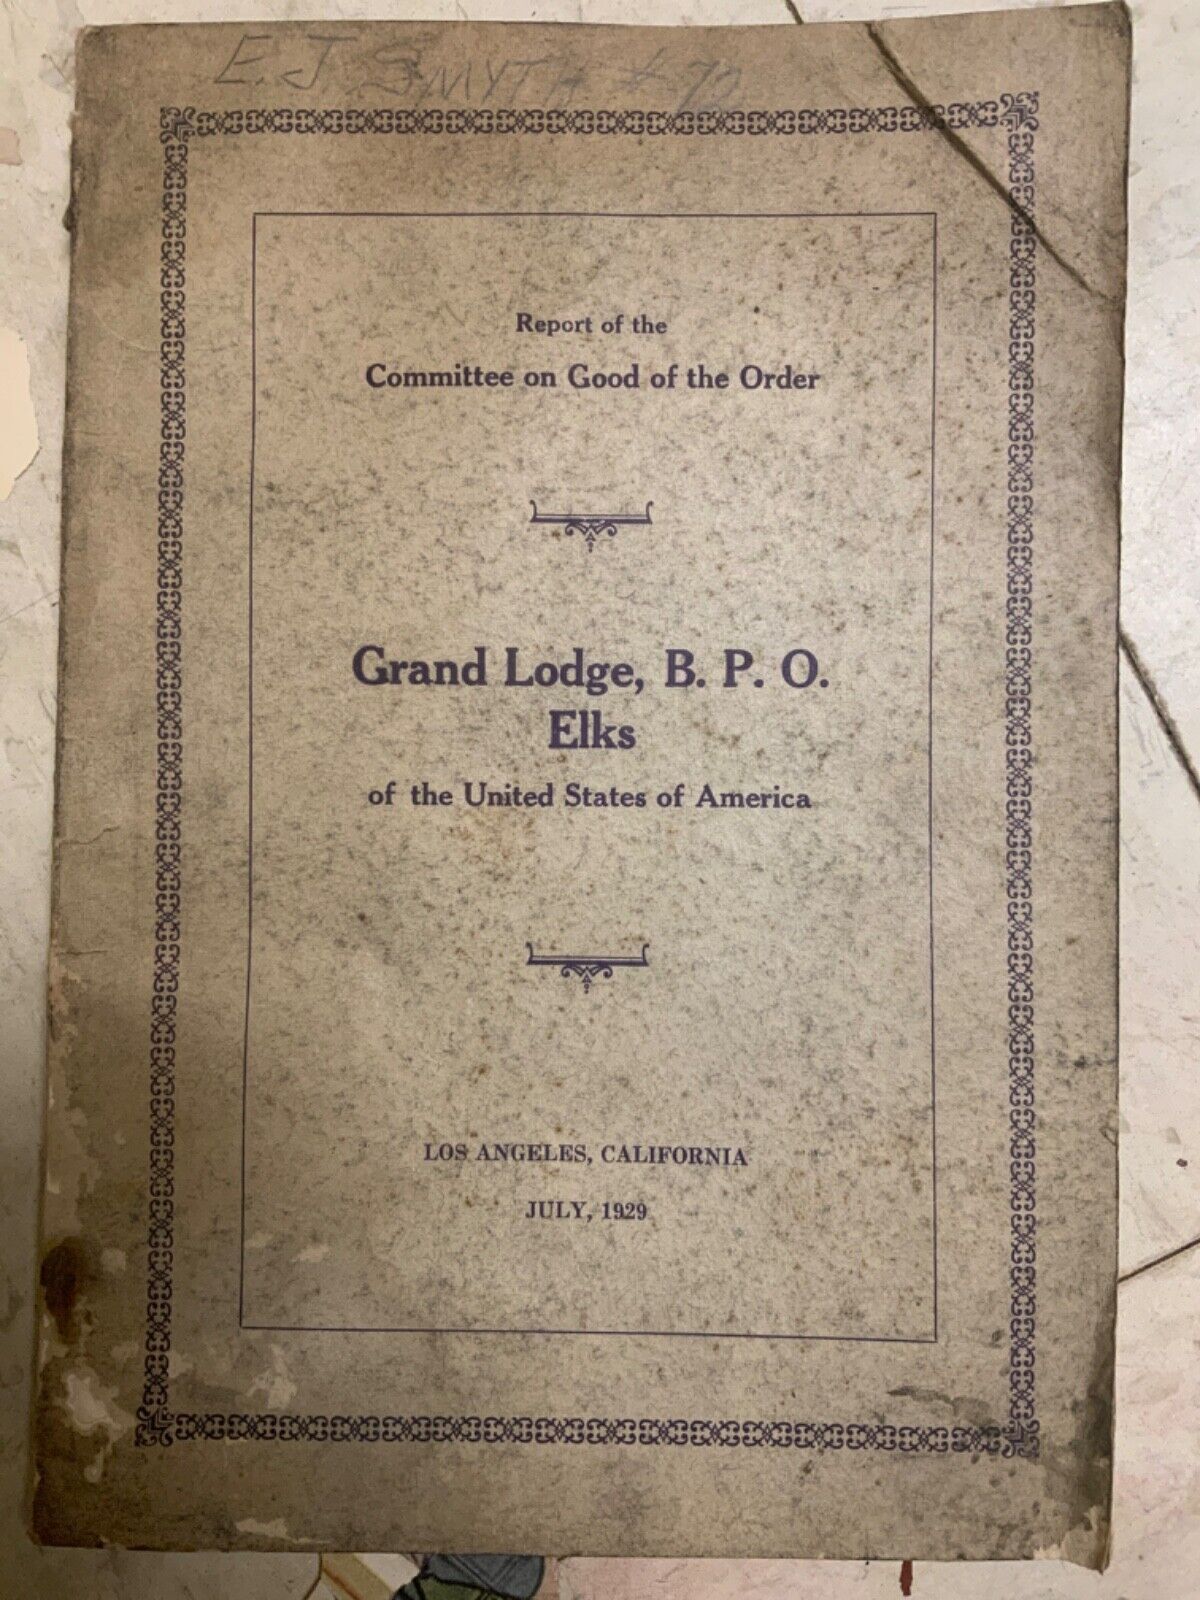 Grand Lodge B.P.O. elks Los Angeles 1929 Report Committee on Good of the Order